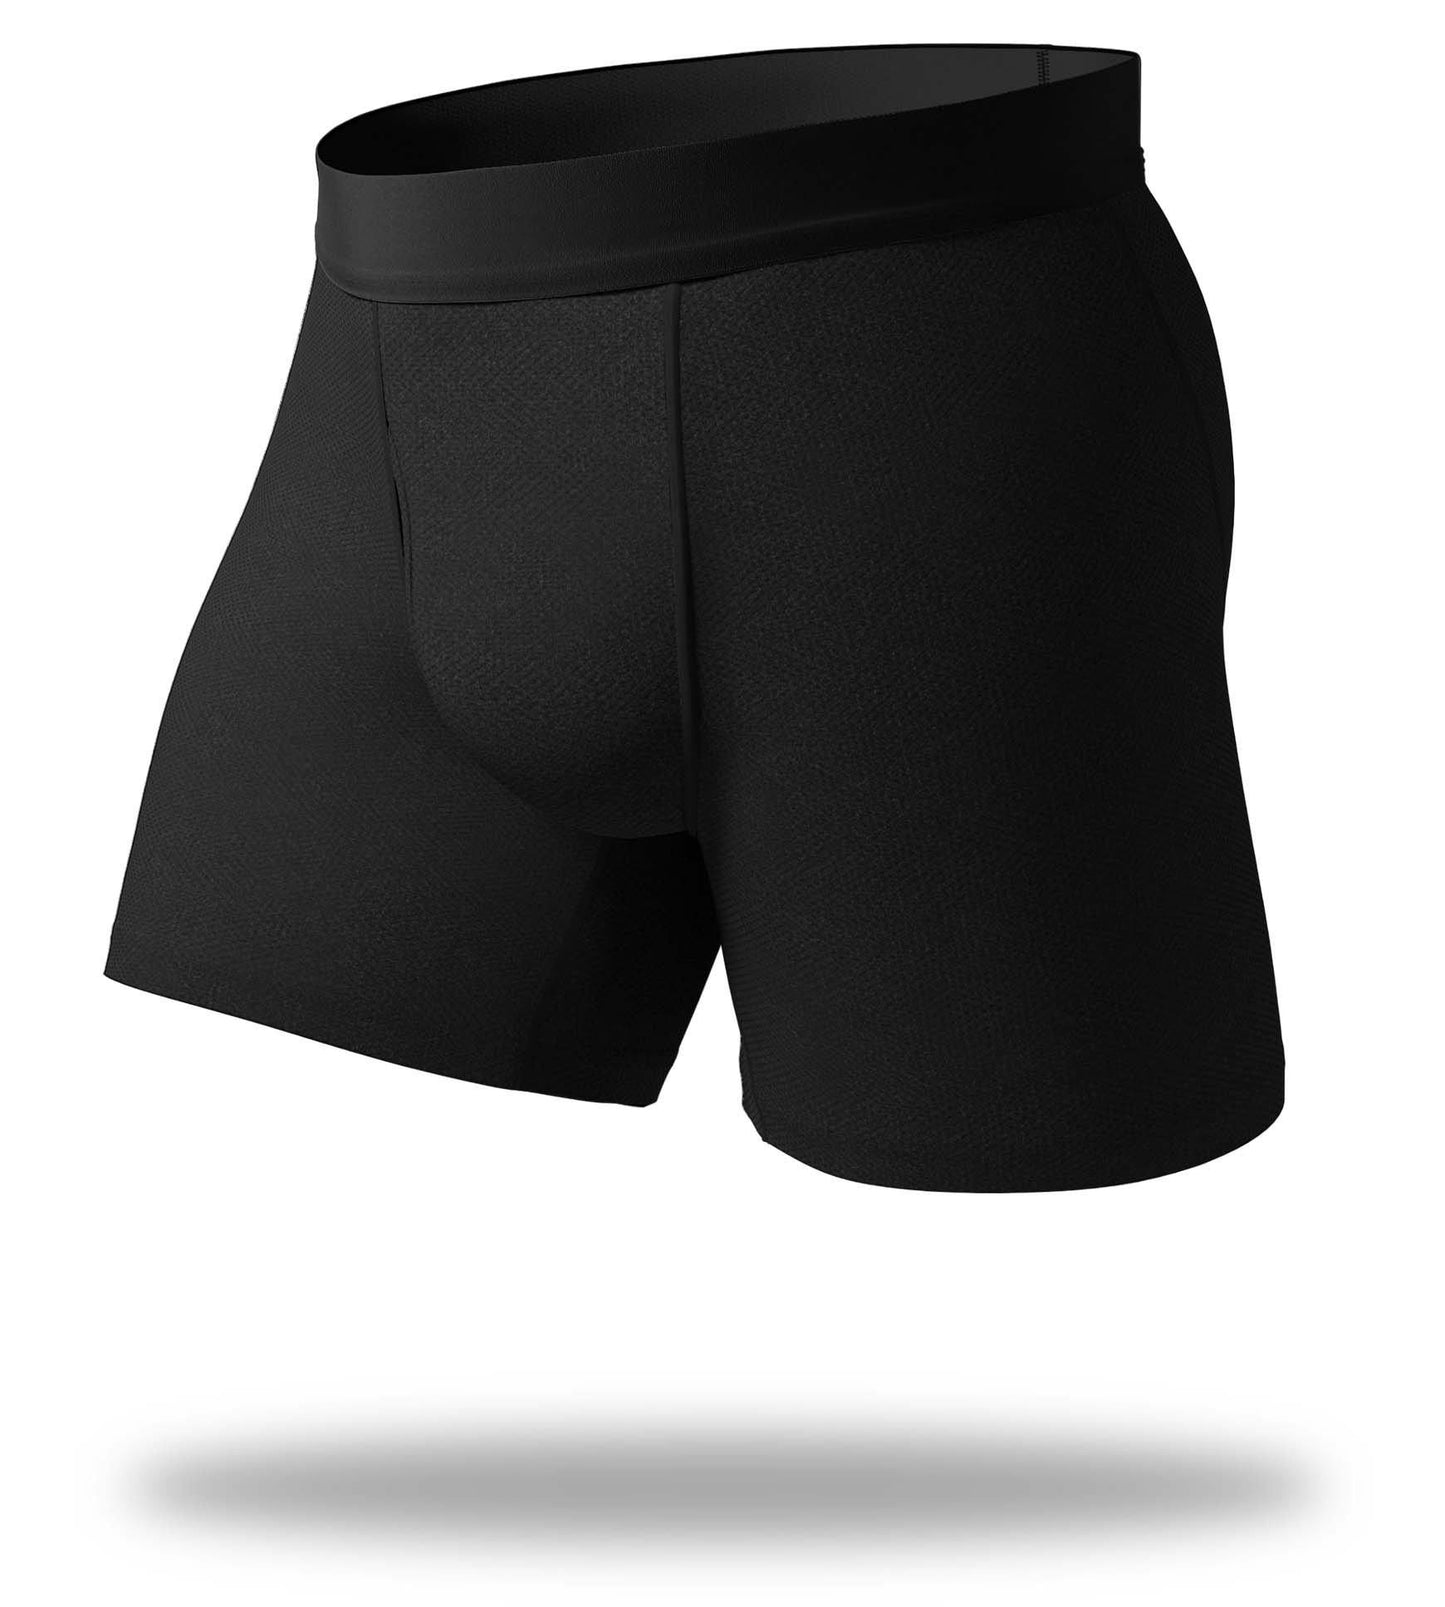 The Solid Gold Charcoal SuperFit Boxer Brief – Pair of Thieves